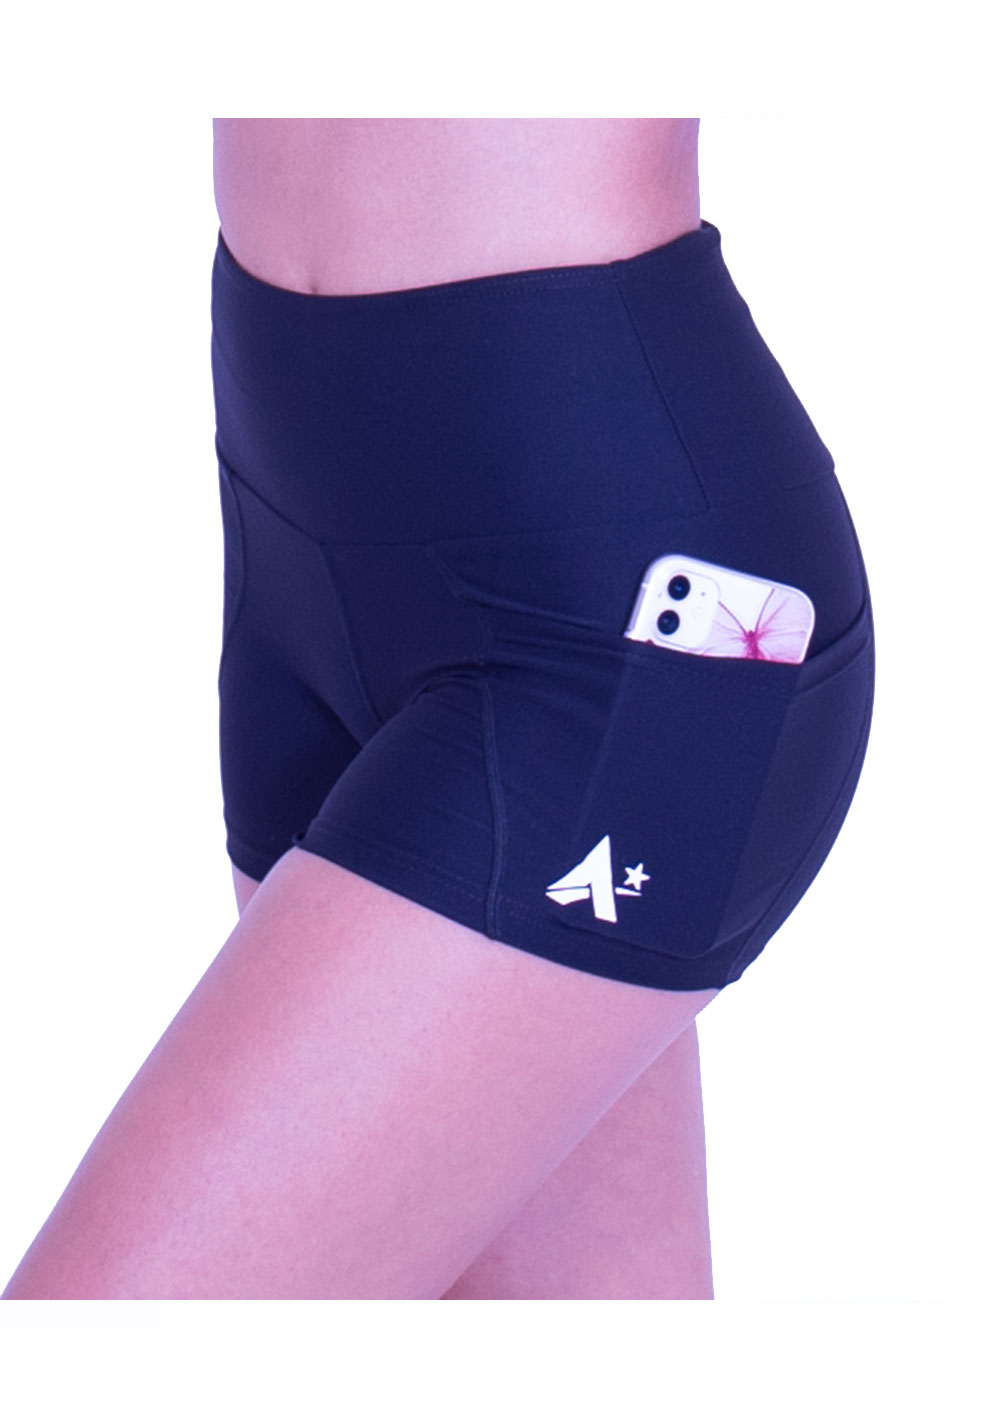 Black Sports Shorts with Phone pocket - A Star Leotards